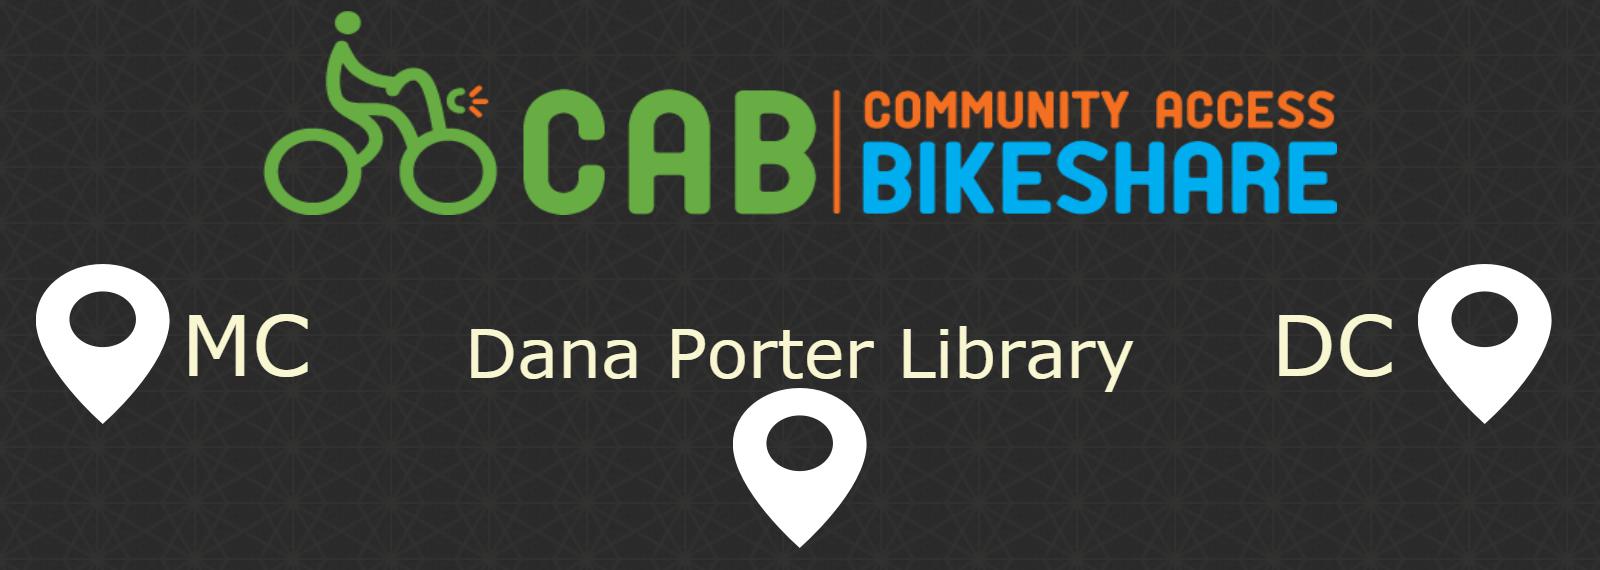 CAB - Community Access Bikeshare with three locations Math & Computers, Dana Porter Library, and Davis Centre